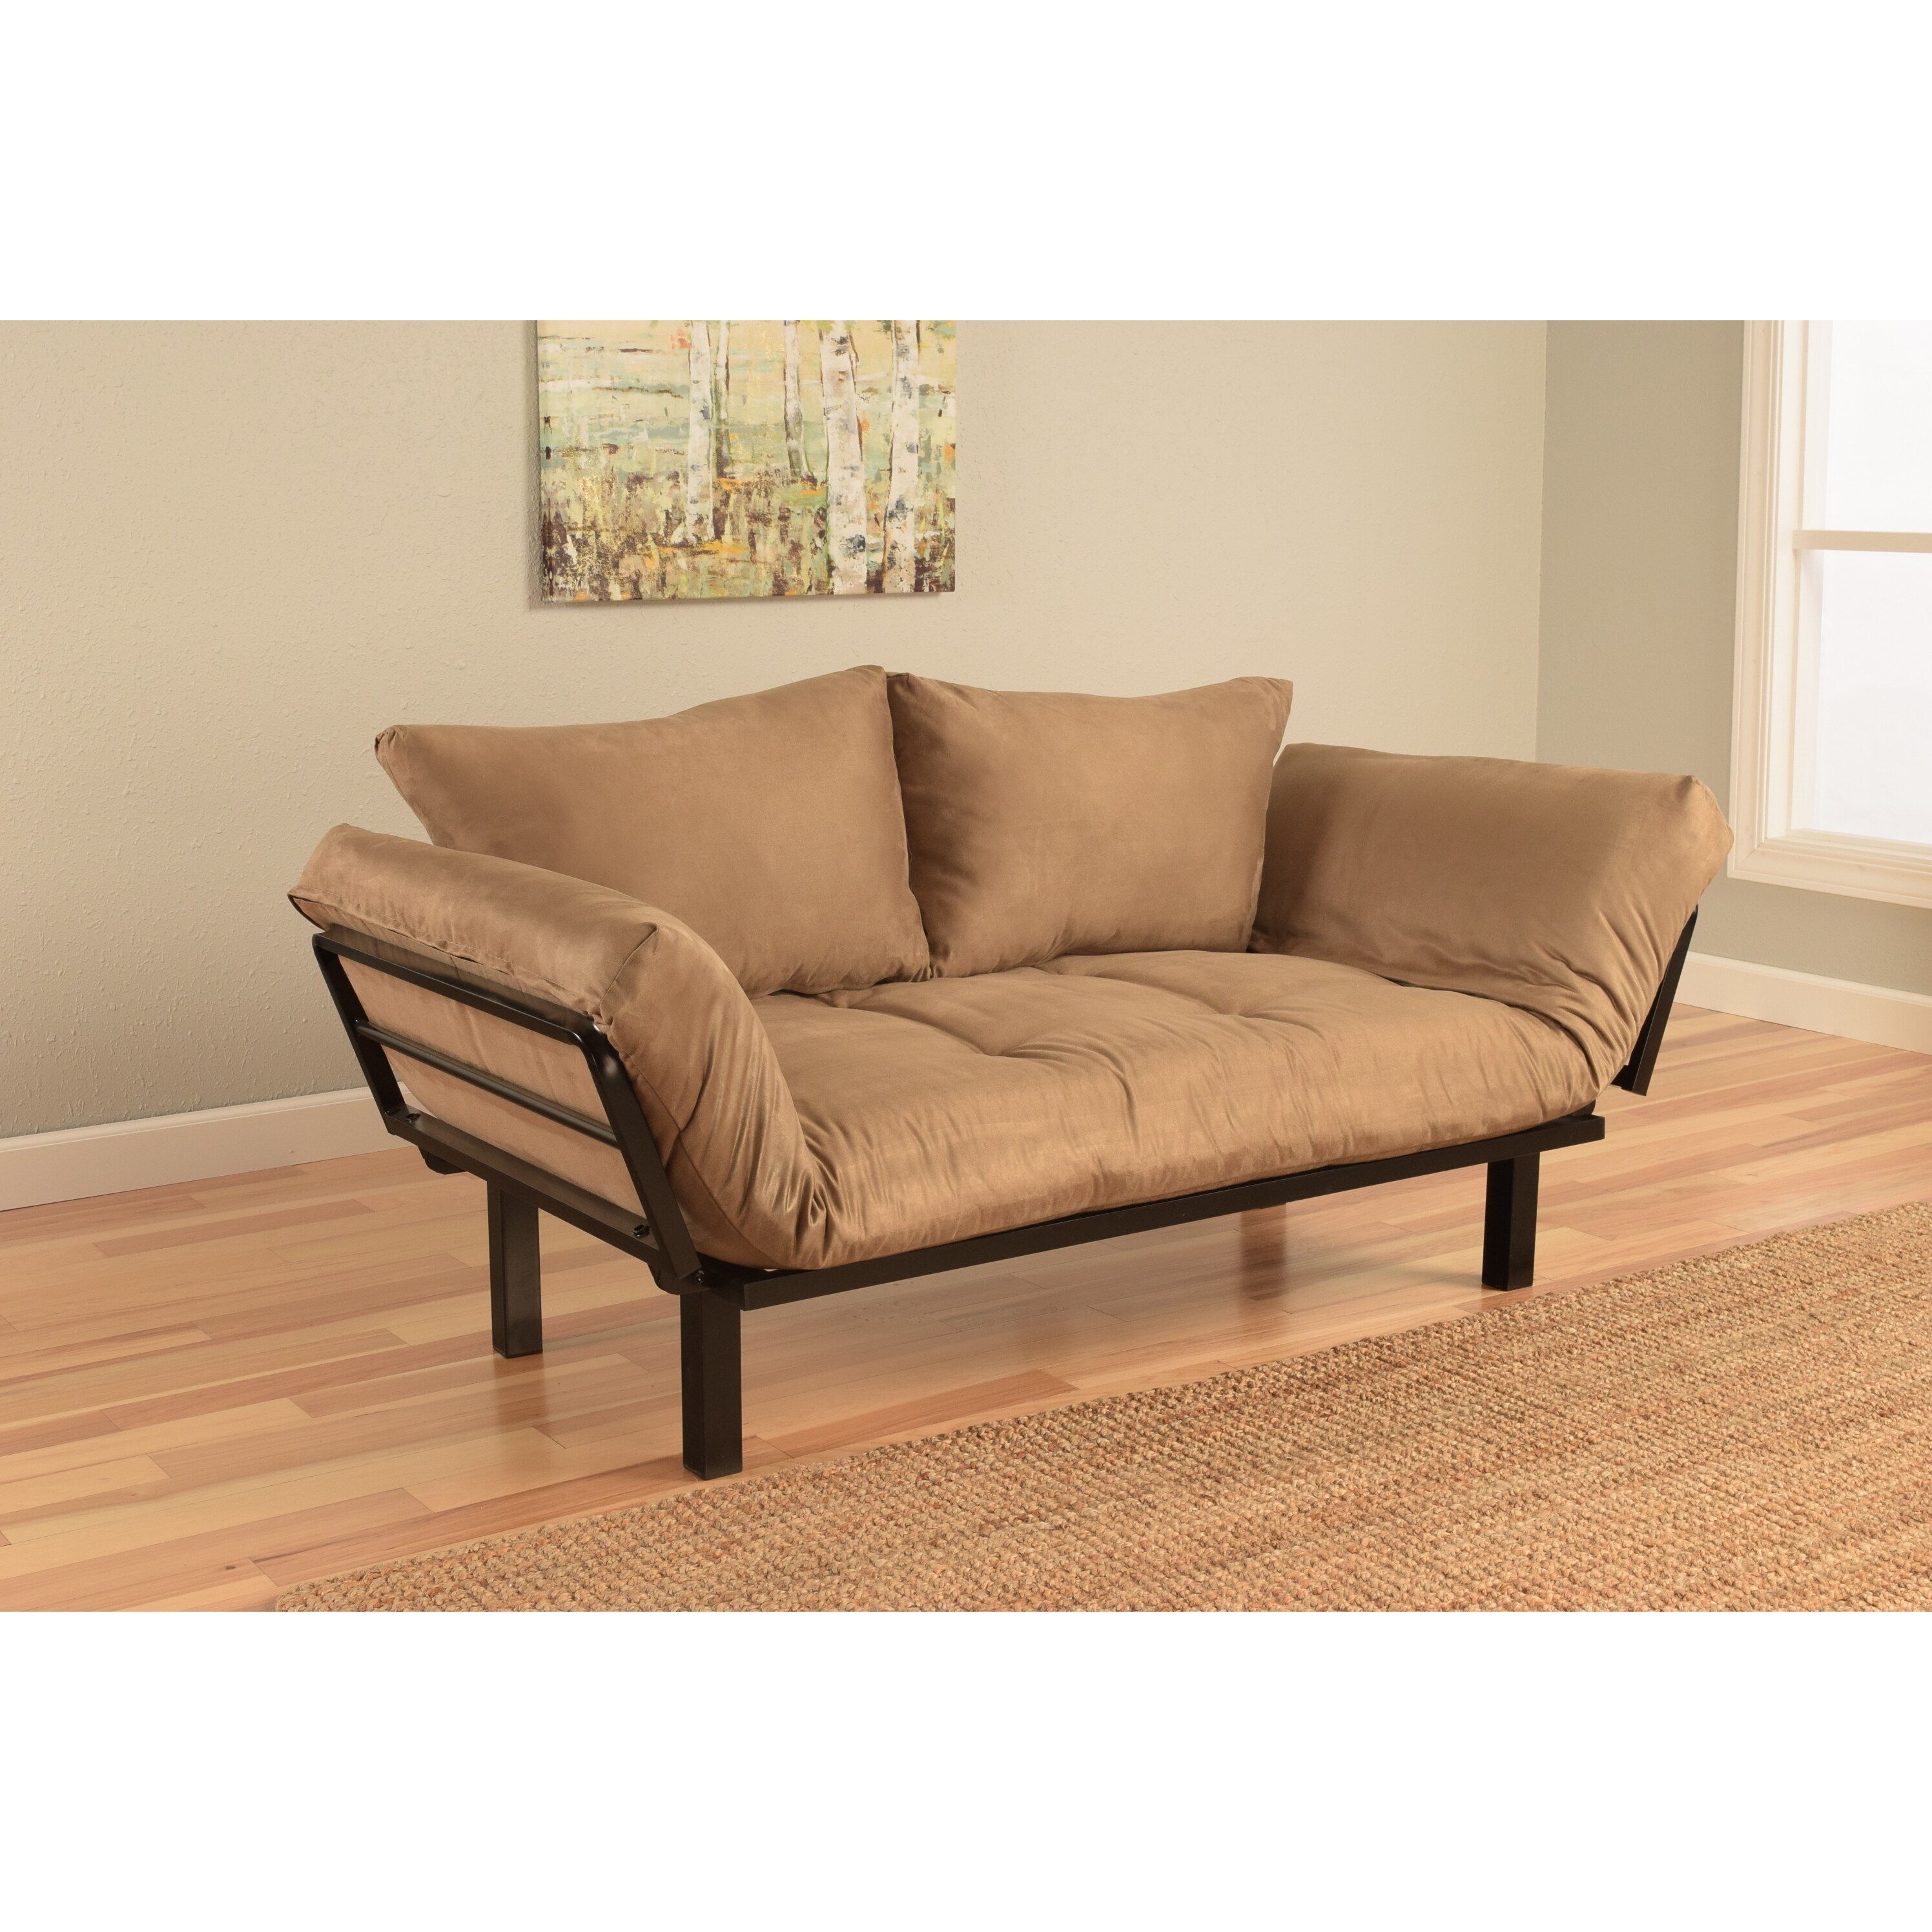 & Peat Suede Daybed Lounger - On Sale - - 11903686